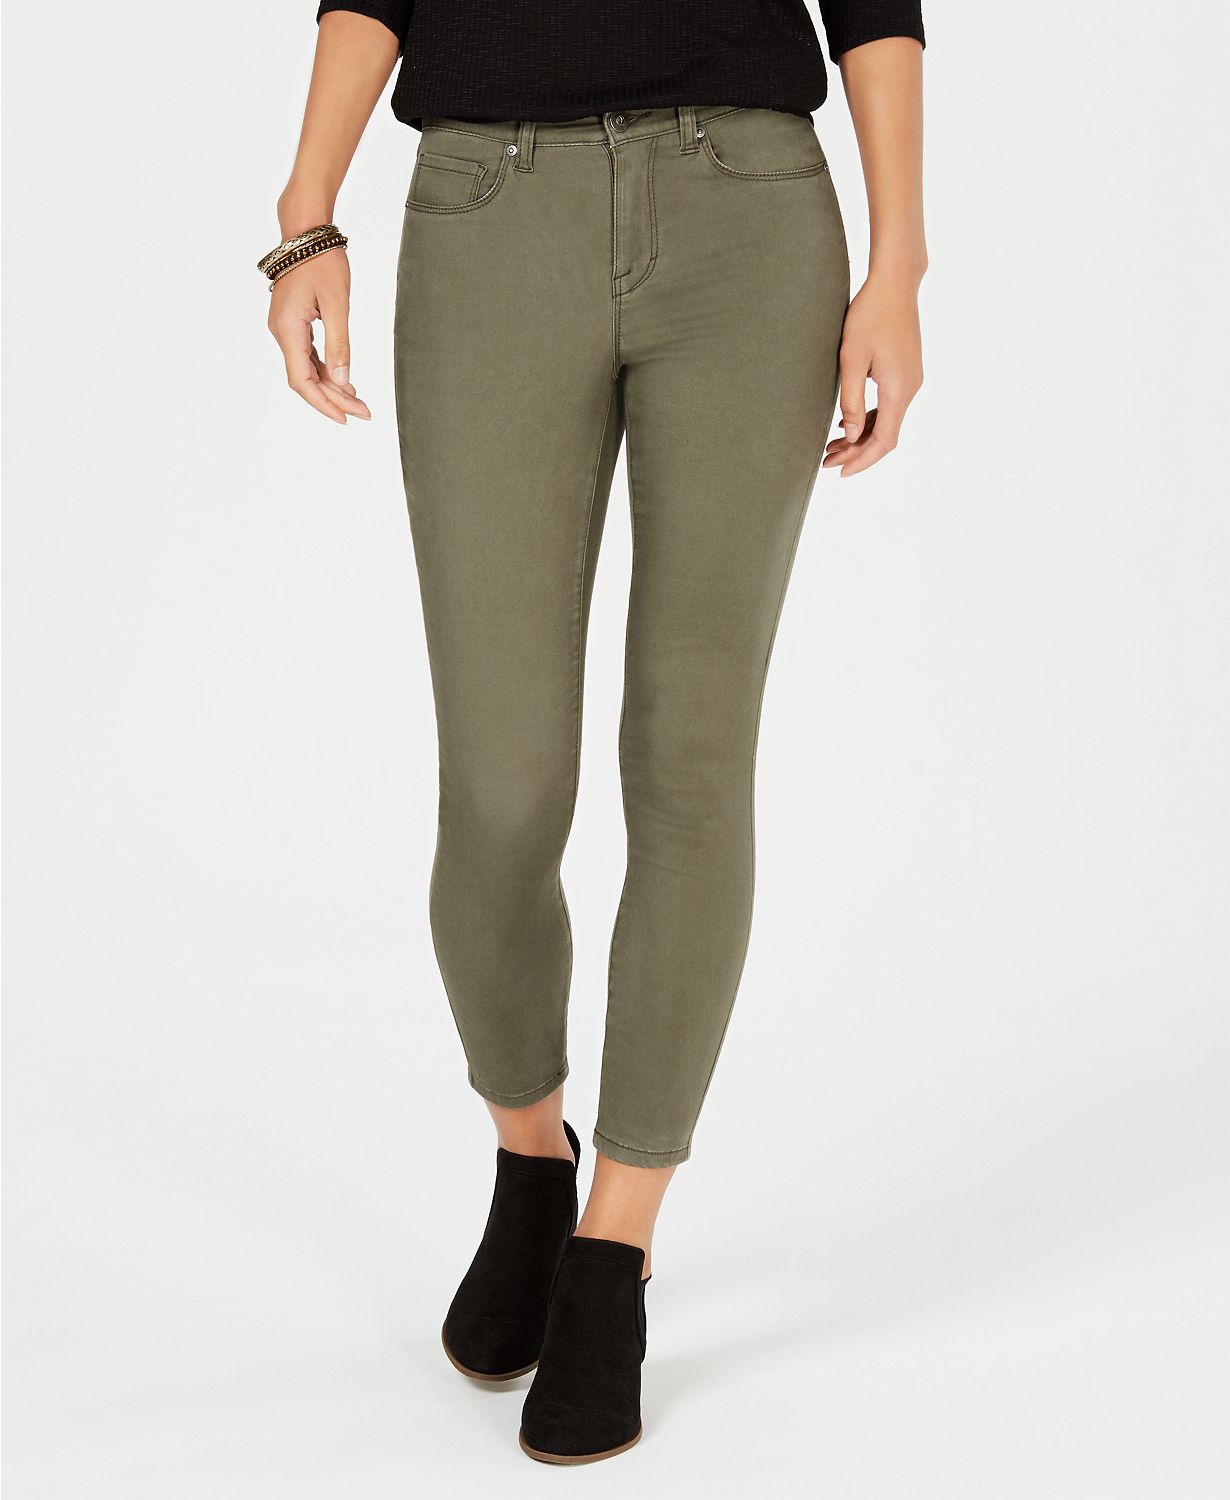 Style Co Super-Skinny Brushed Ankle Jeans Olive Night 6